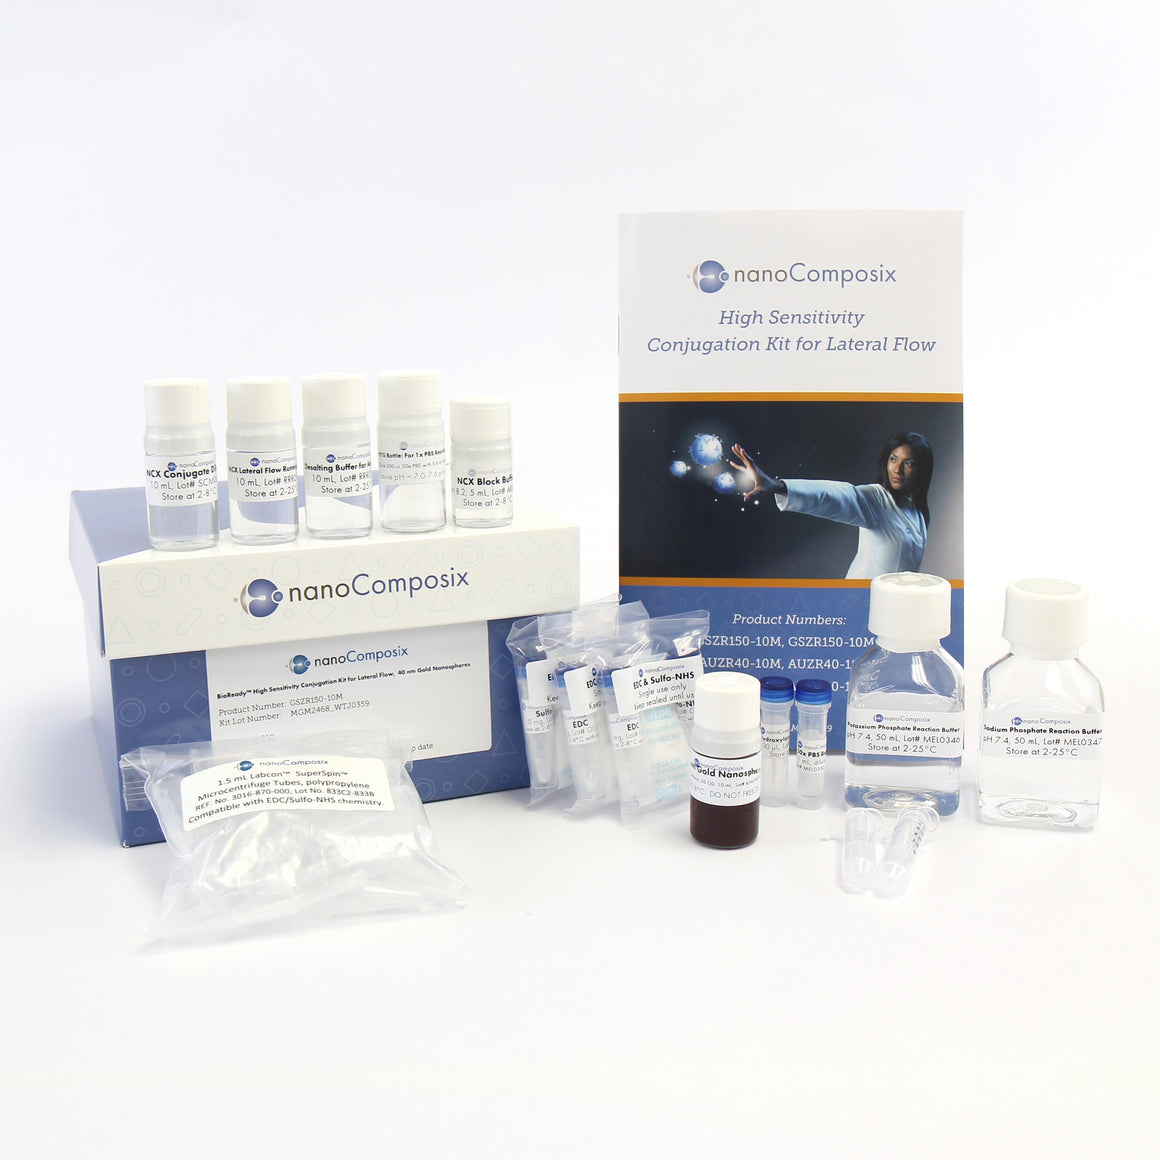 Gold Conjugation Kit for Lateral Flow